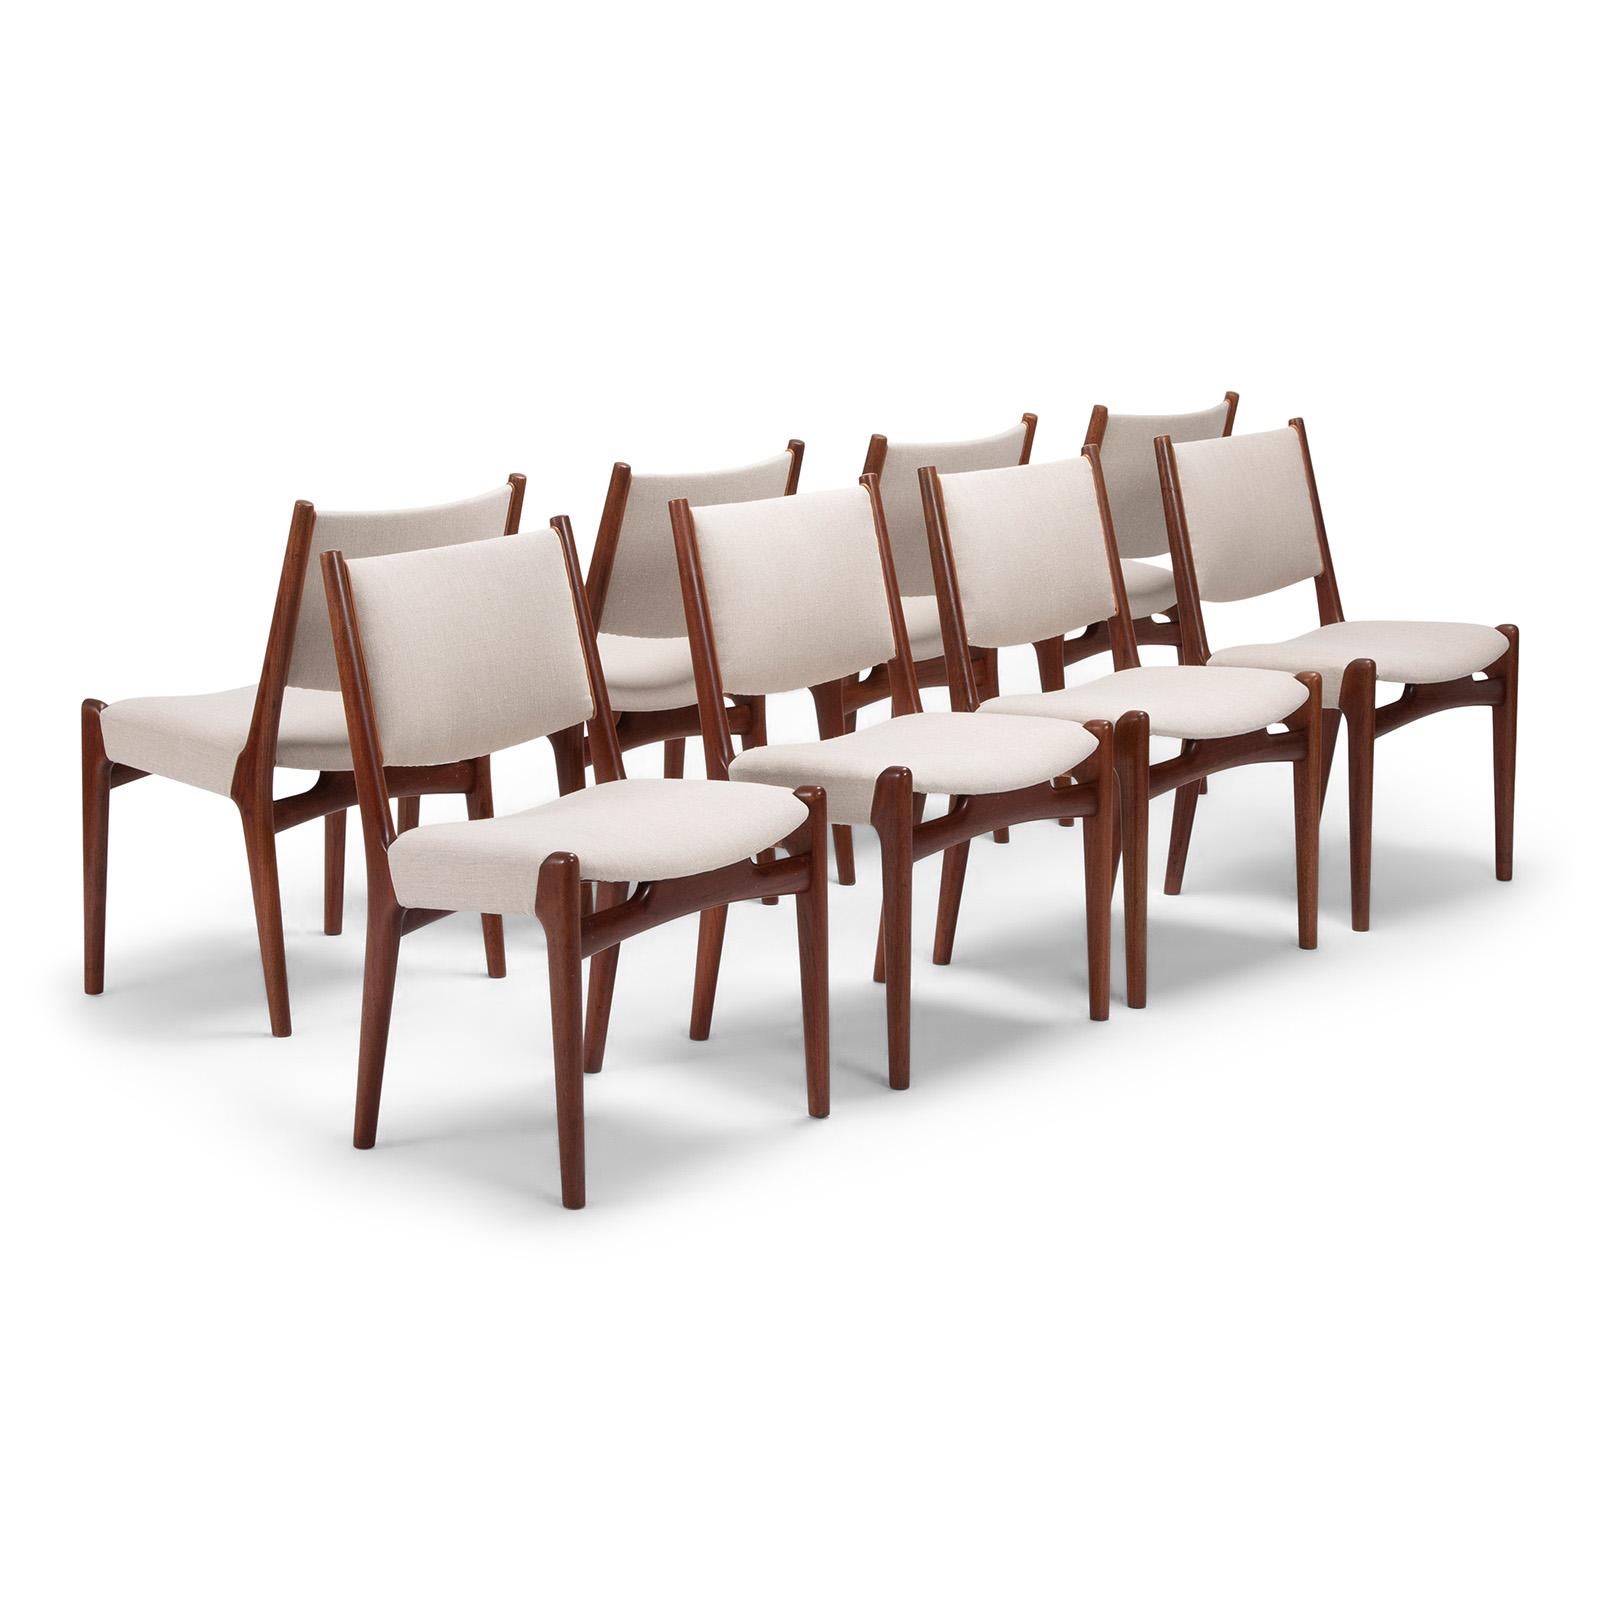 Danish Set of 10 Chairs by Hans Wegner, Made by Cabinetmaker Johannes Hansen For Sale